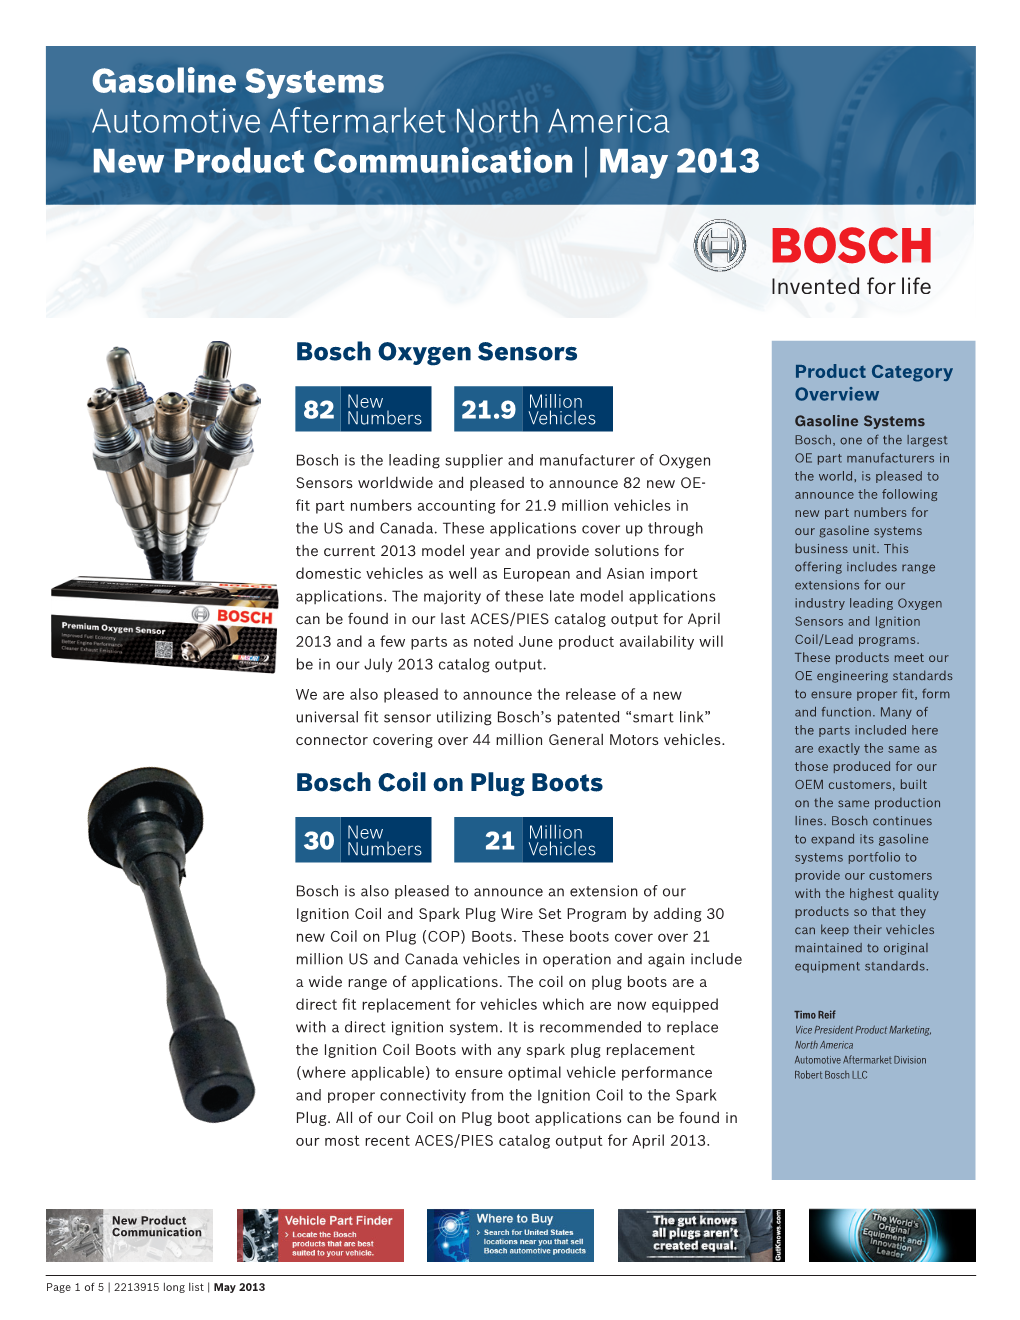 Gasoline Systems Automotive Aftermarket North America New Product Communication | May 2013